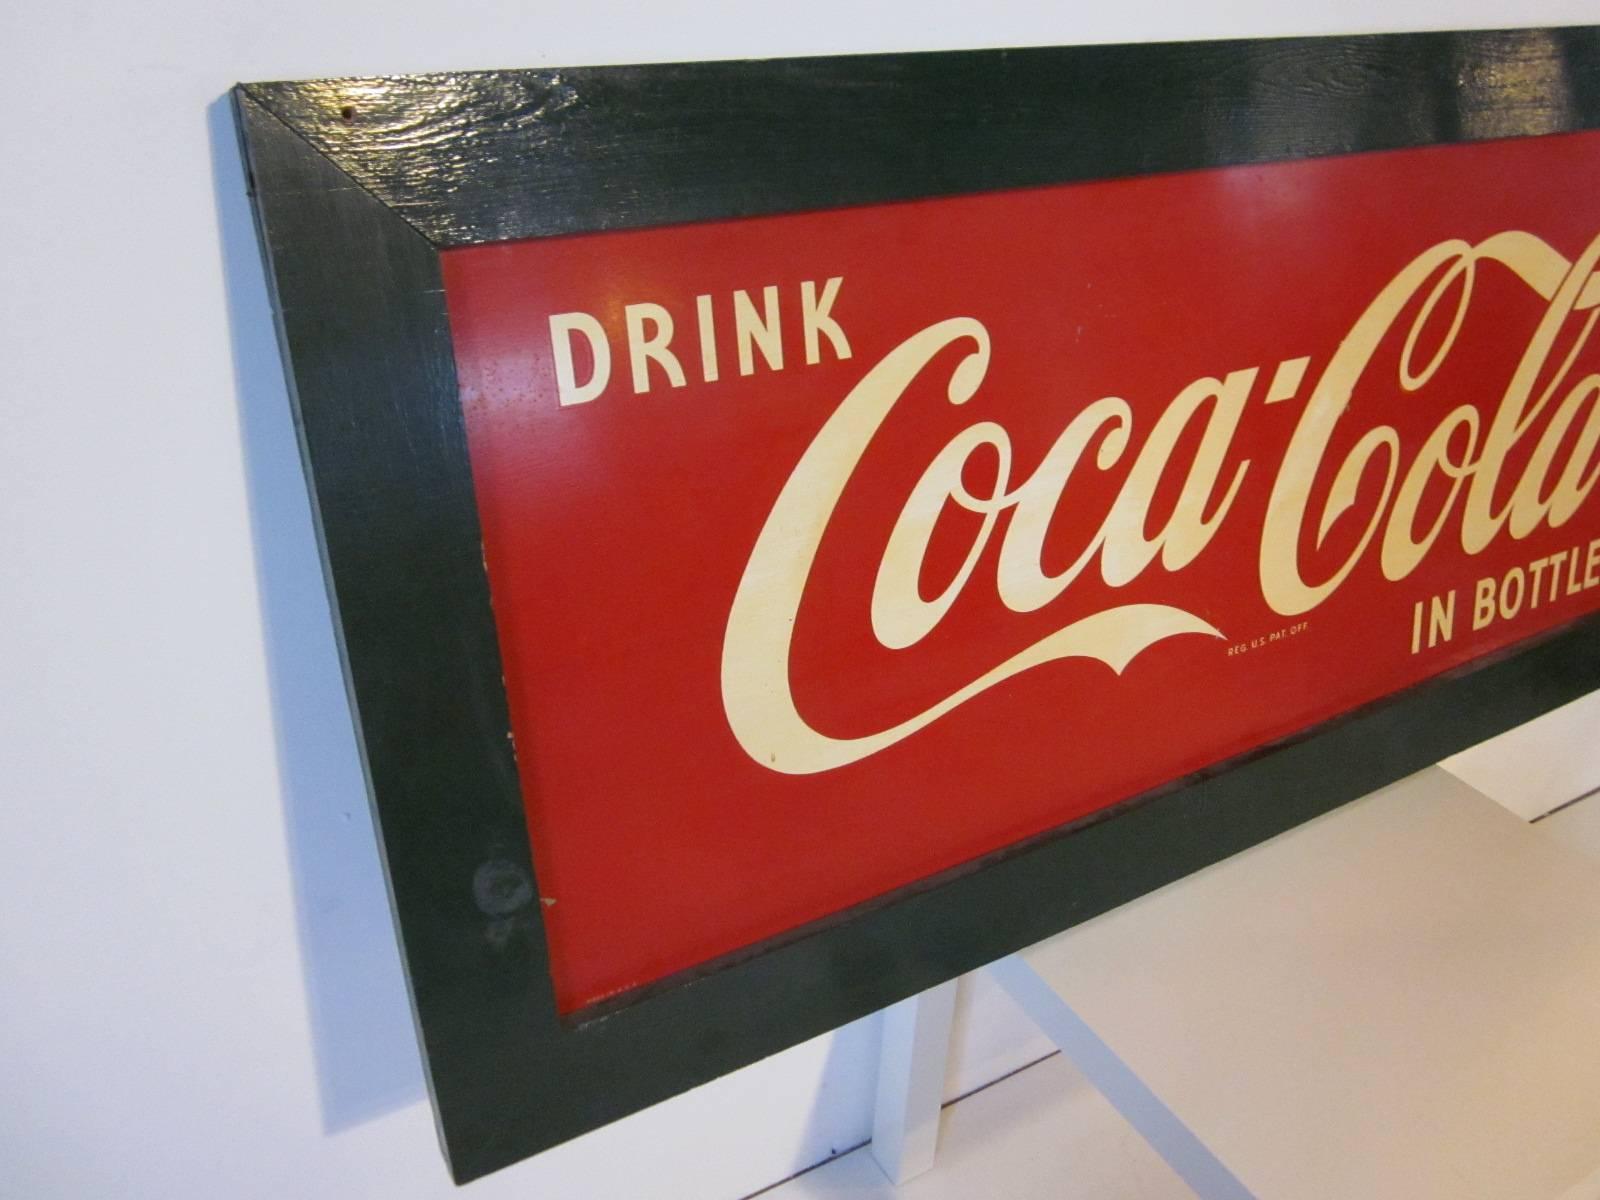 A green wood framed vintage Coca Cola tin sign advertising the beverage in bottles in white and red with small lettering 